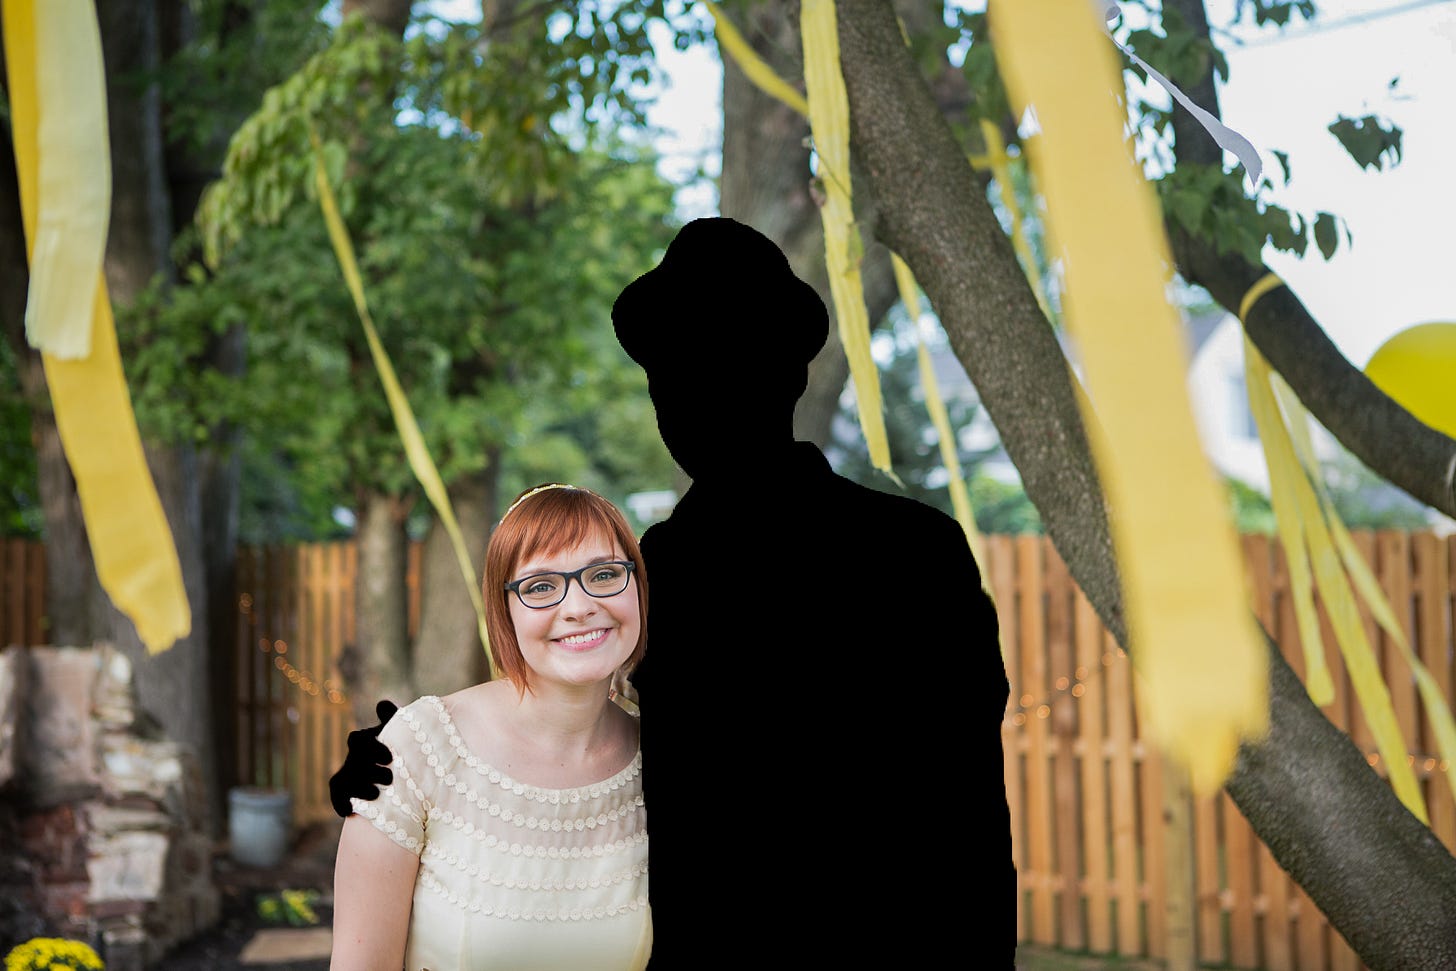 My brother and I smiling at the camera on my wedding day in my backyard. He is silhouetted and wearing a hat.